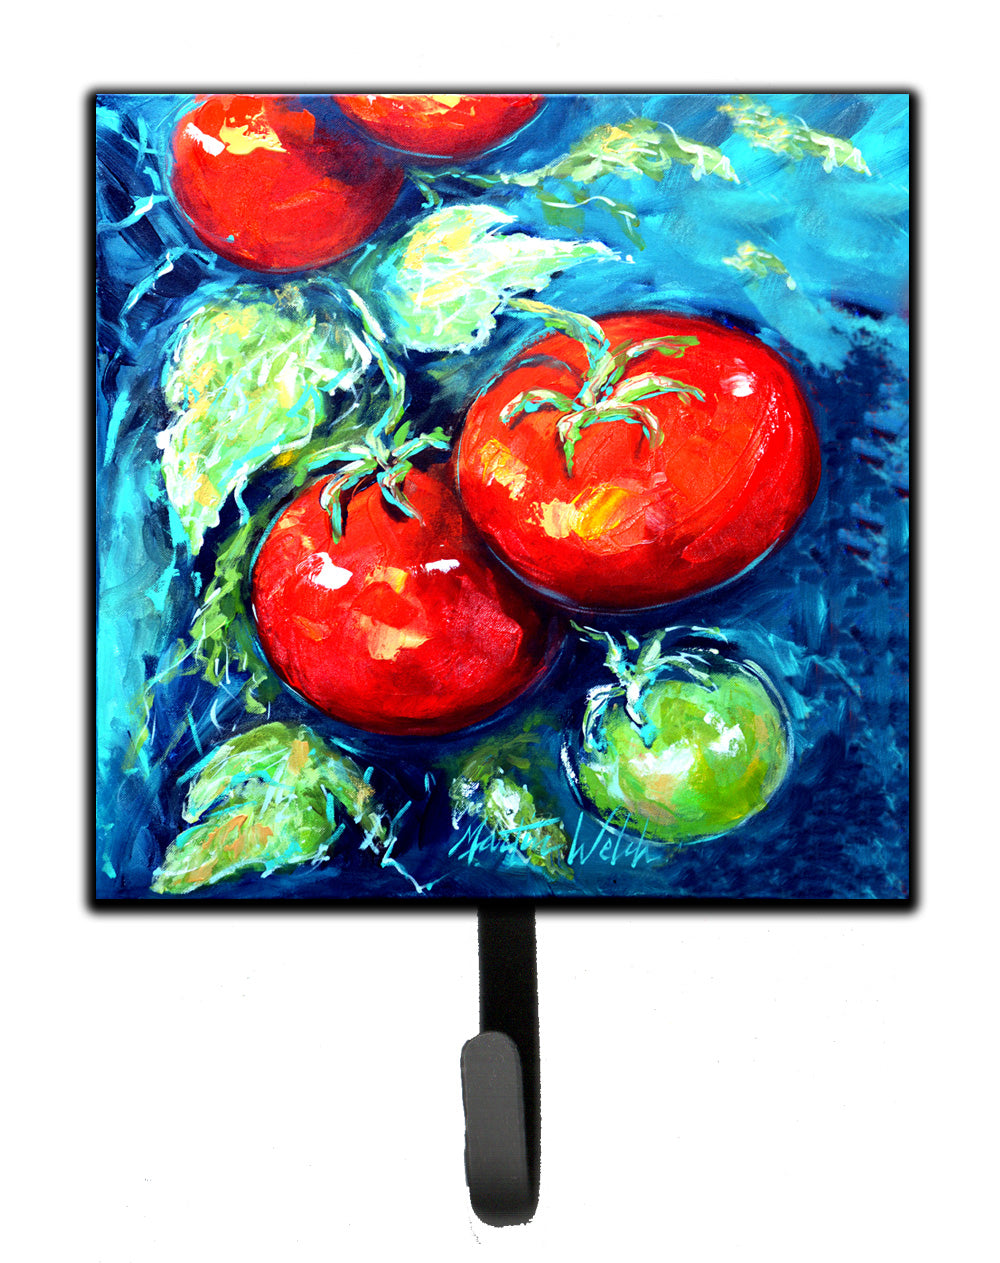 Buy this Vegetables - Tomatoes on the vine Leash or Key Holder